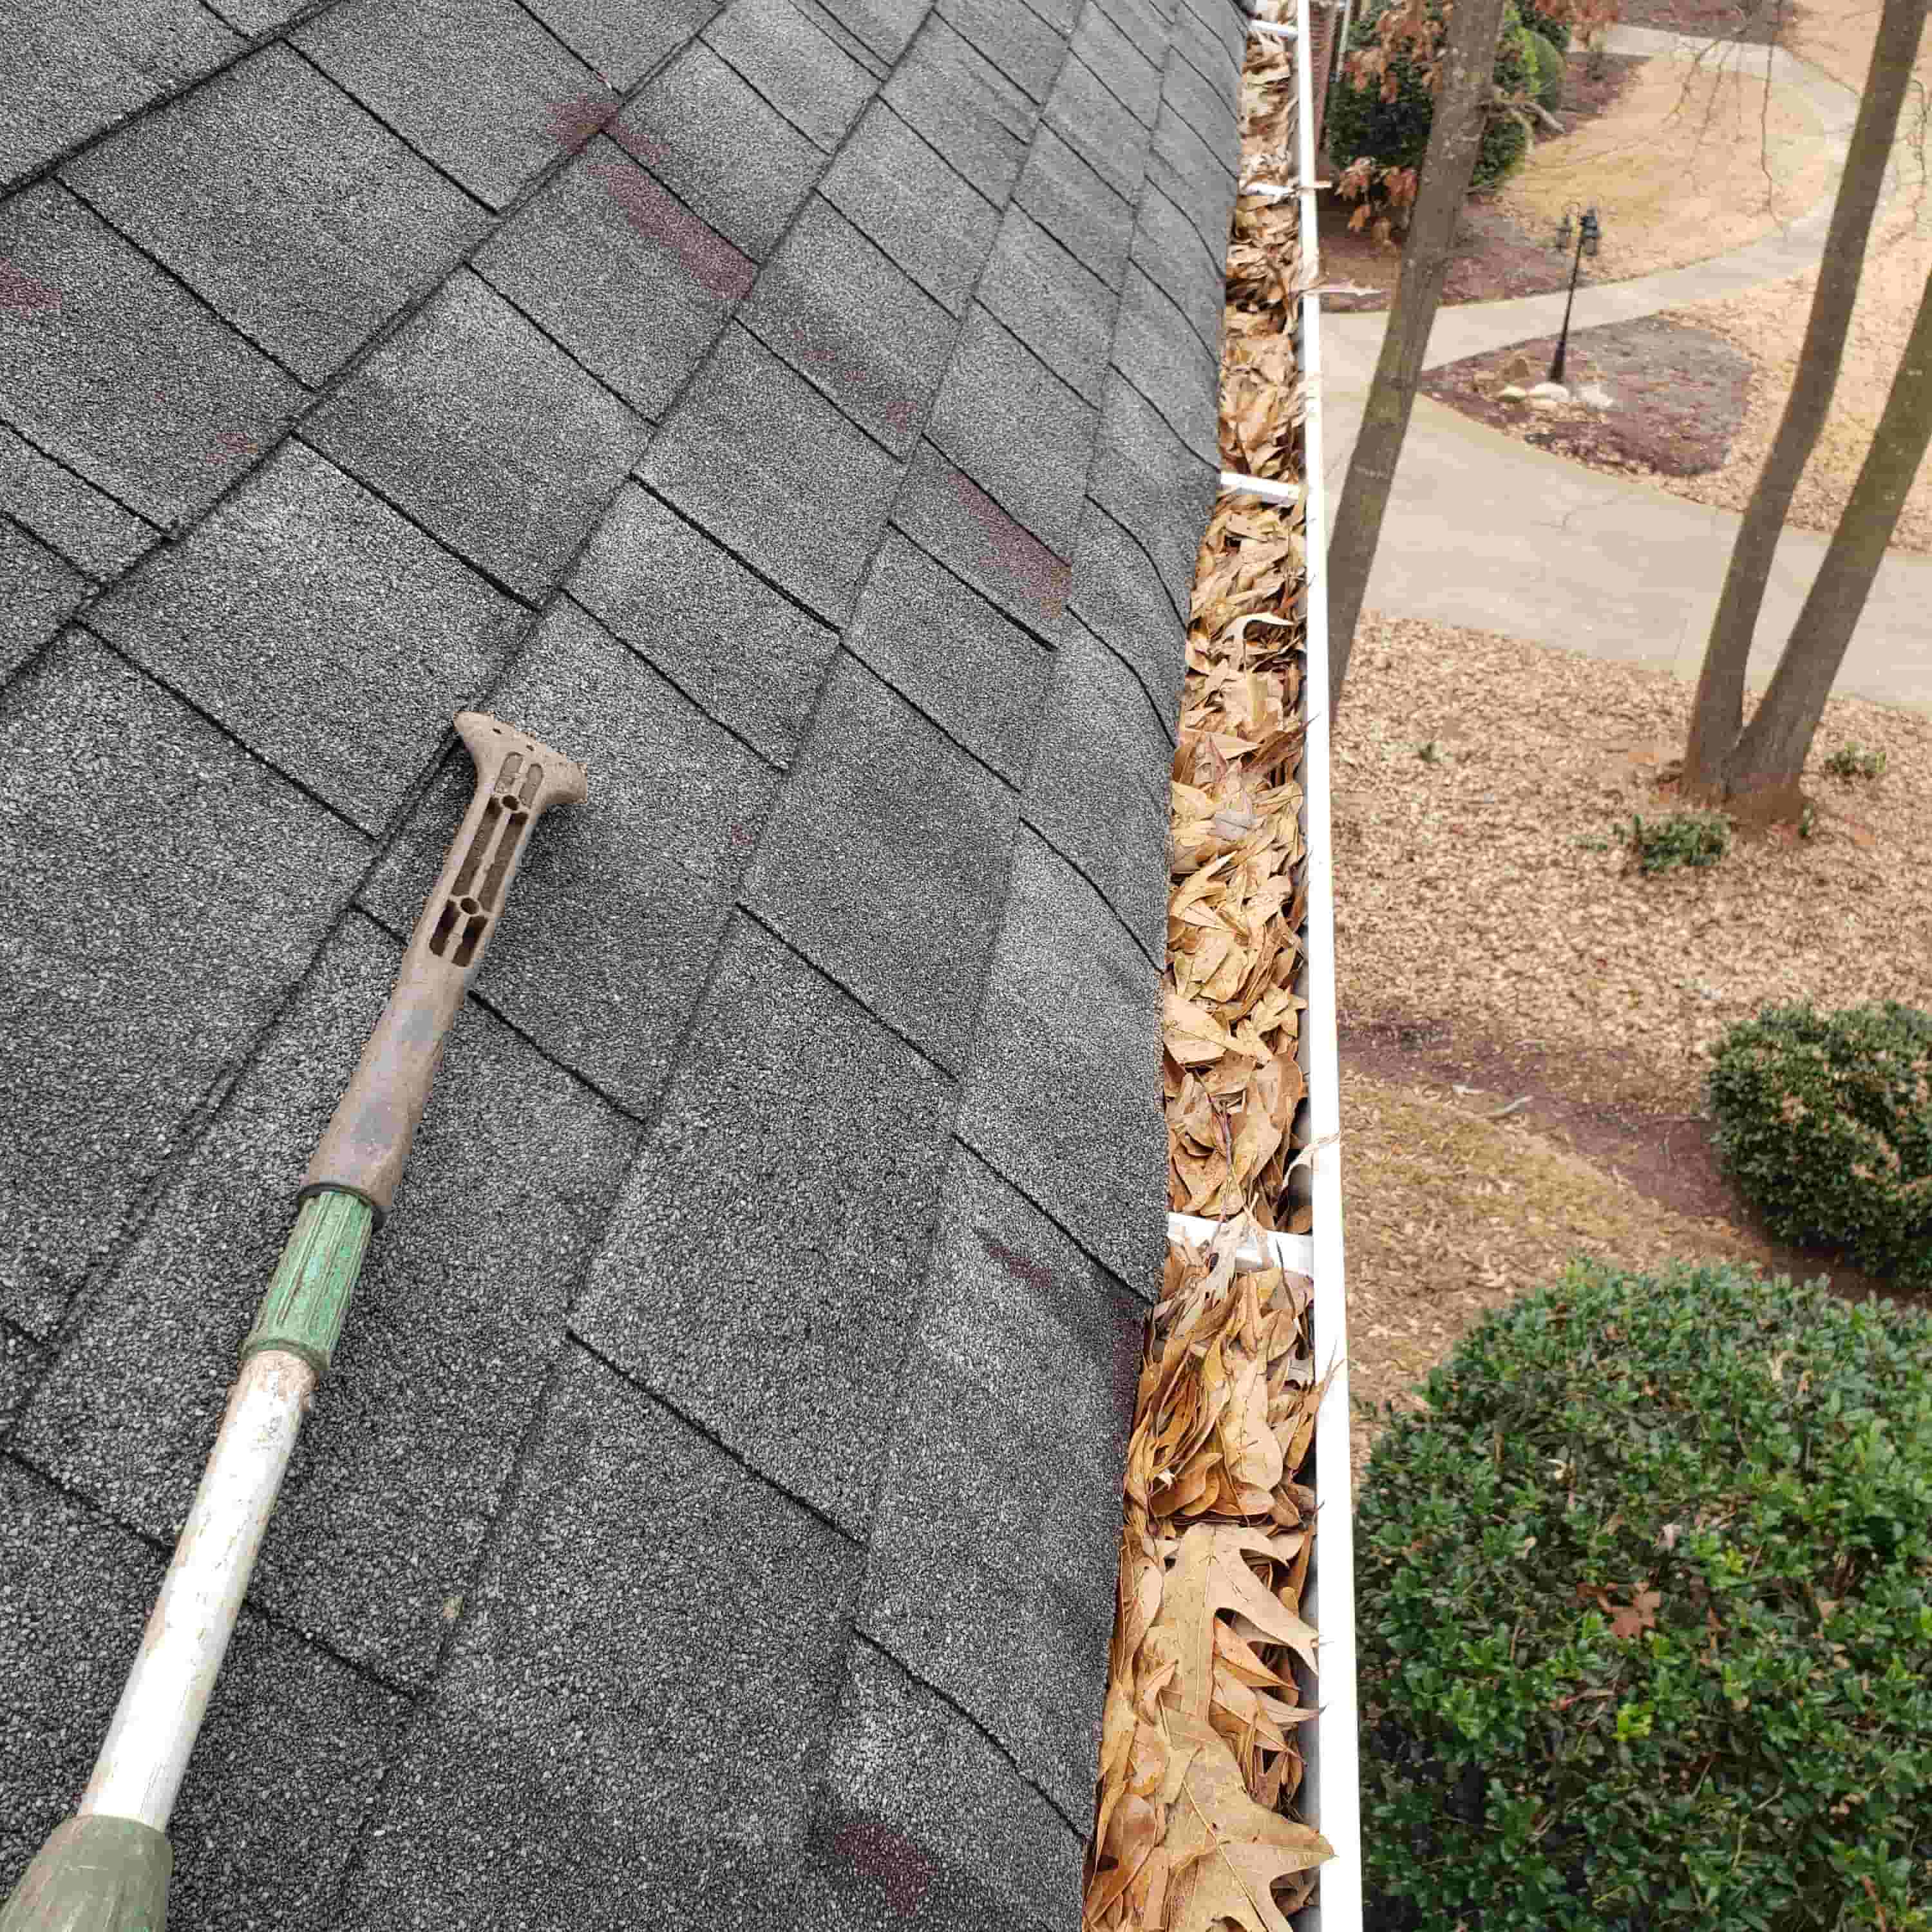 rain gutter cleaning tools